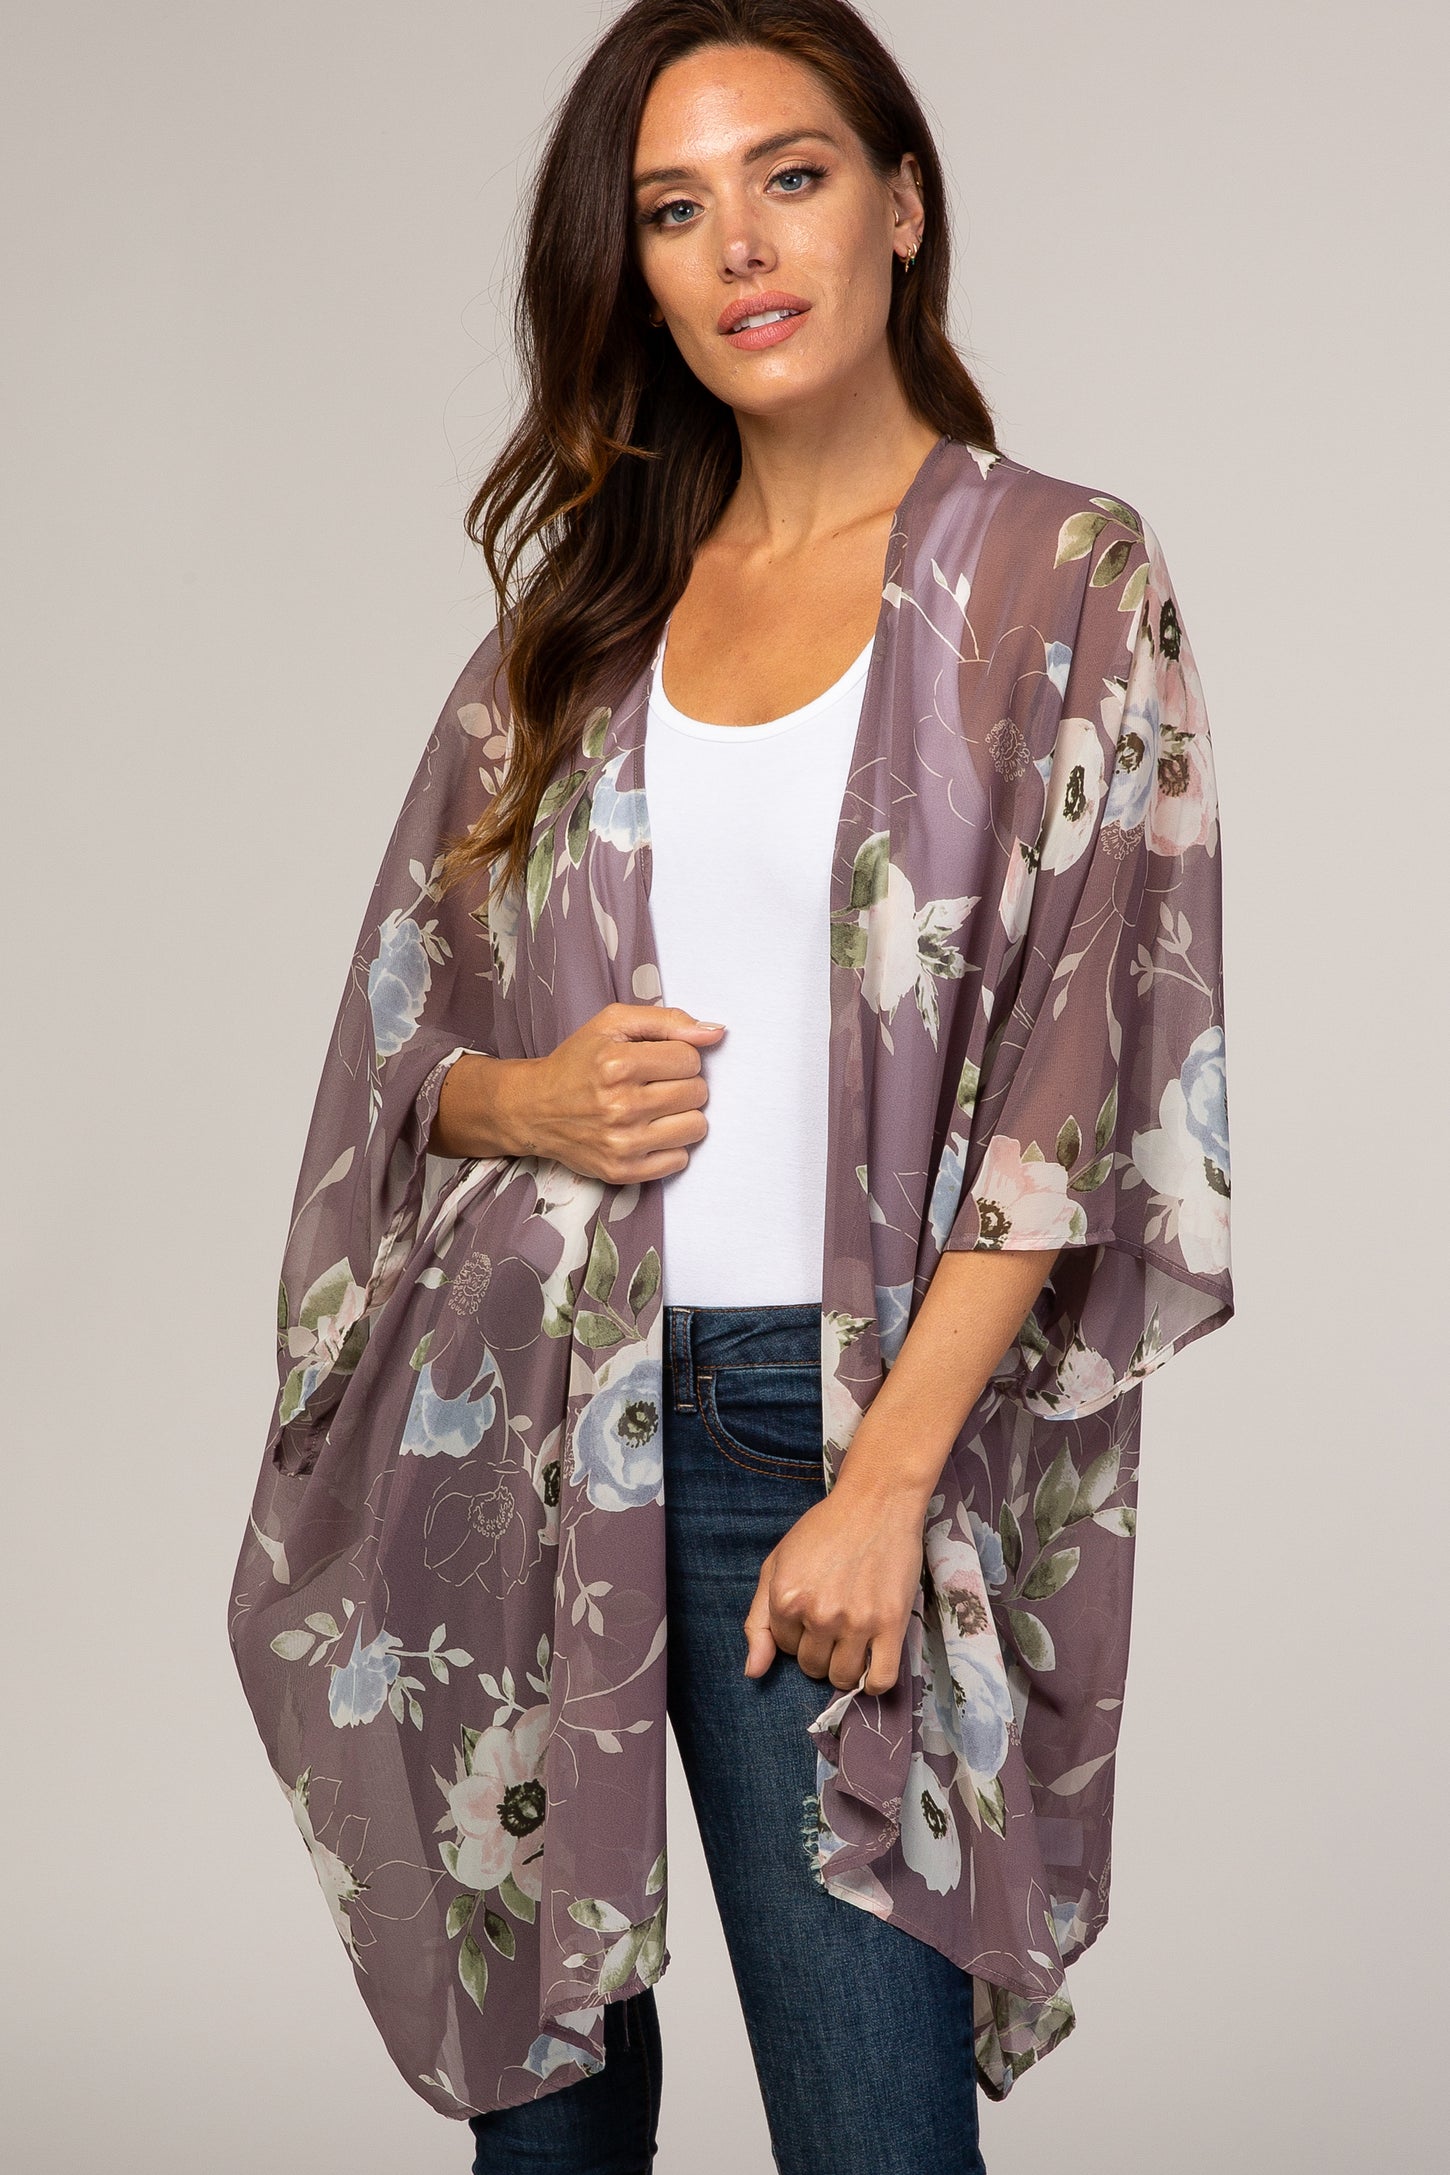 Lavender Floral Sheer Maternity Cover Up– PinkBlush